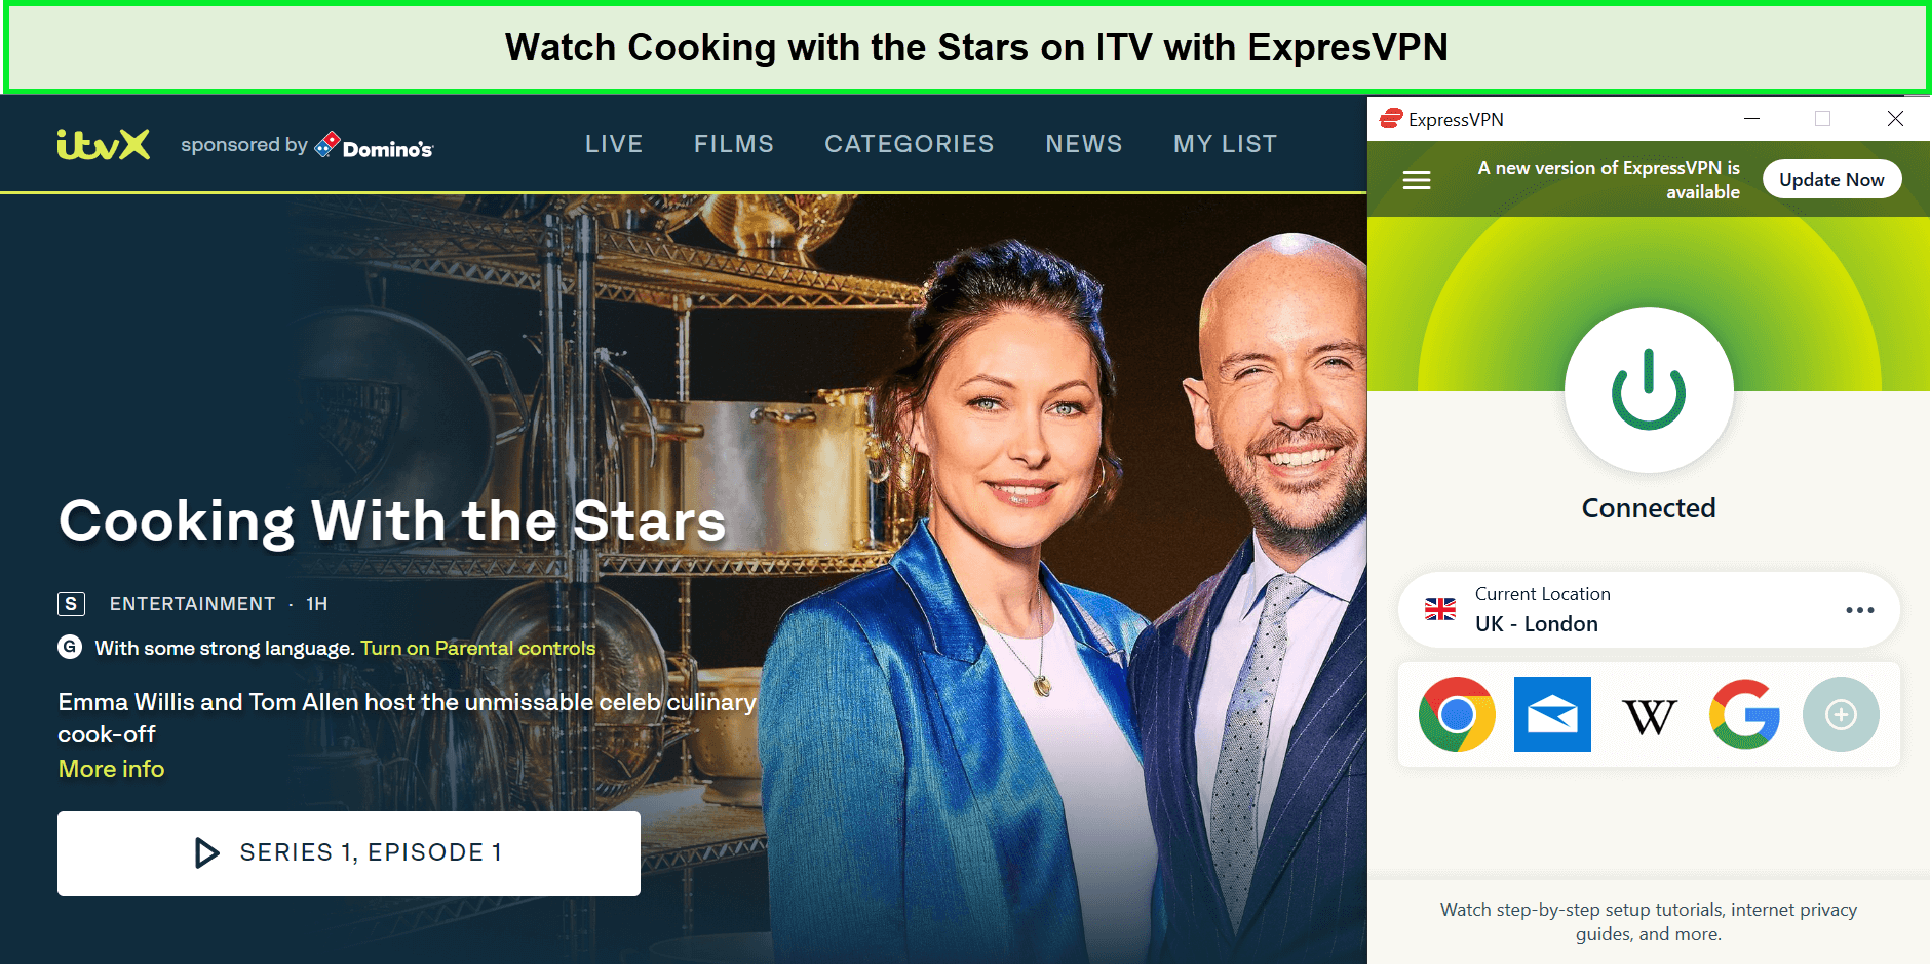 Watch-Cooking-with-the-Stars-Season-3-in-New Zealand-on-ITV-with-ExpresVPN